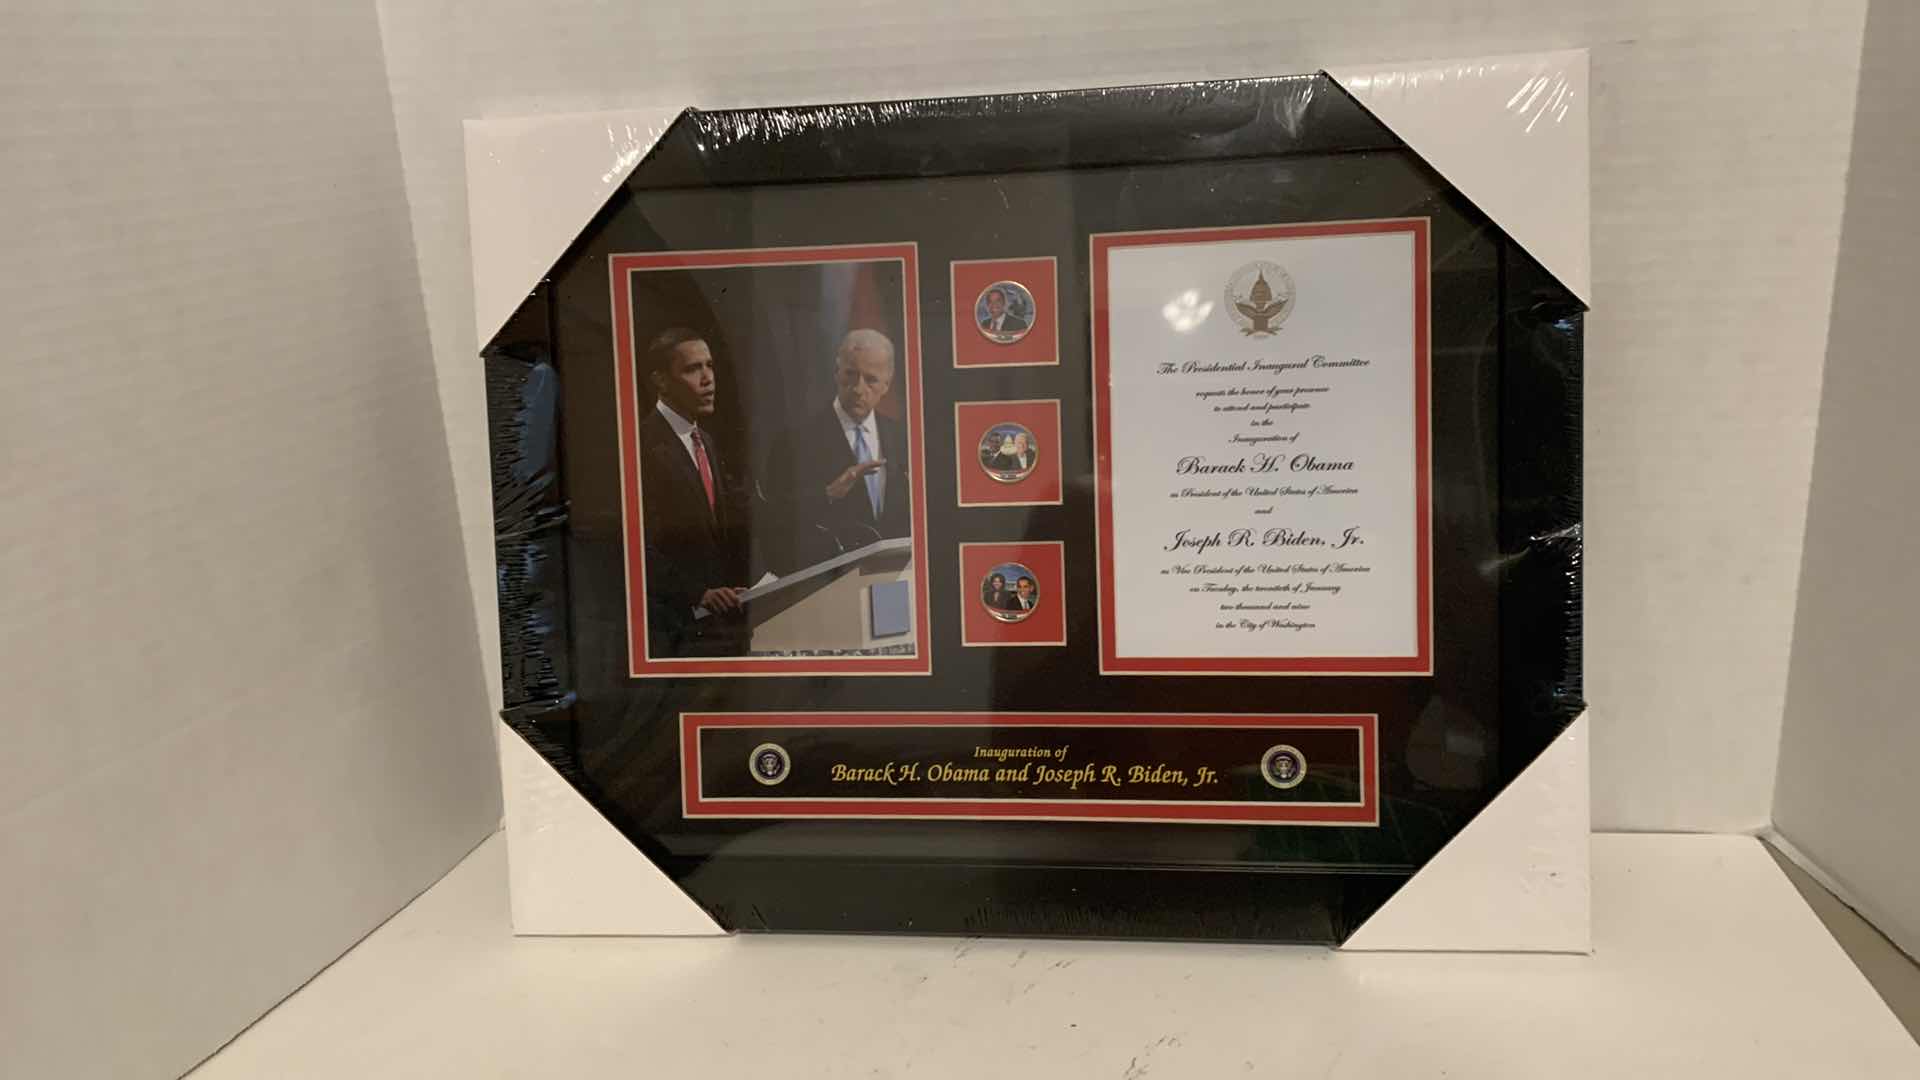 Photo 1 of UNITED STATES DEMOCRATIC PARTY OBAMA BIDEN INAUGURATION PLAQUE WITH BUTTONS